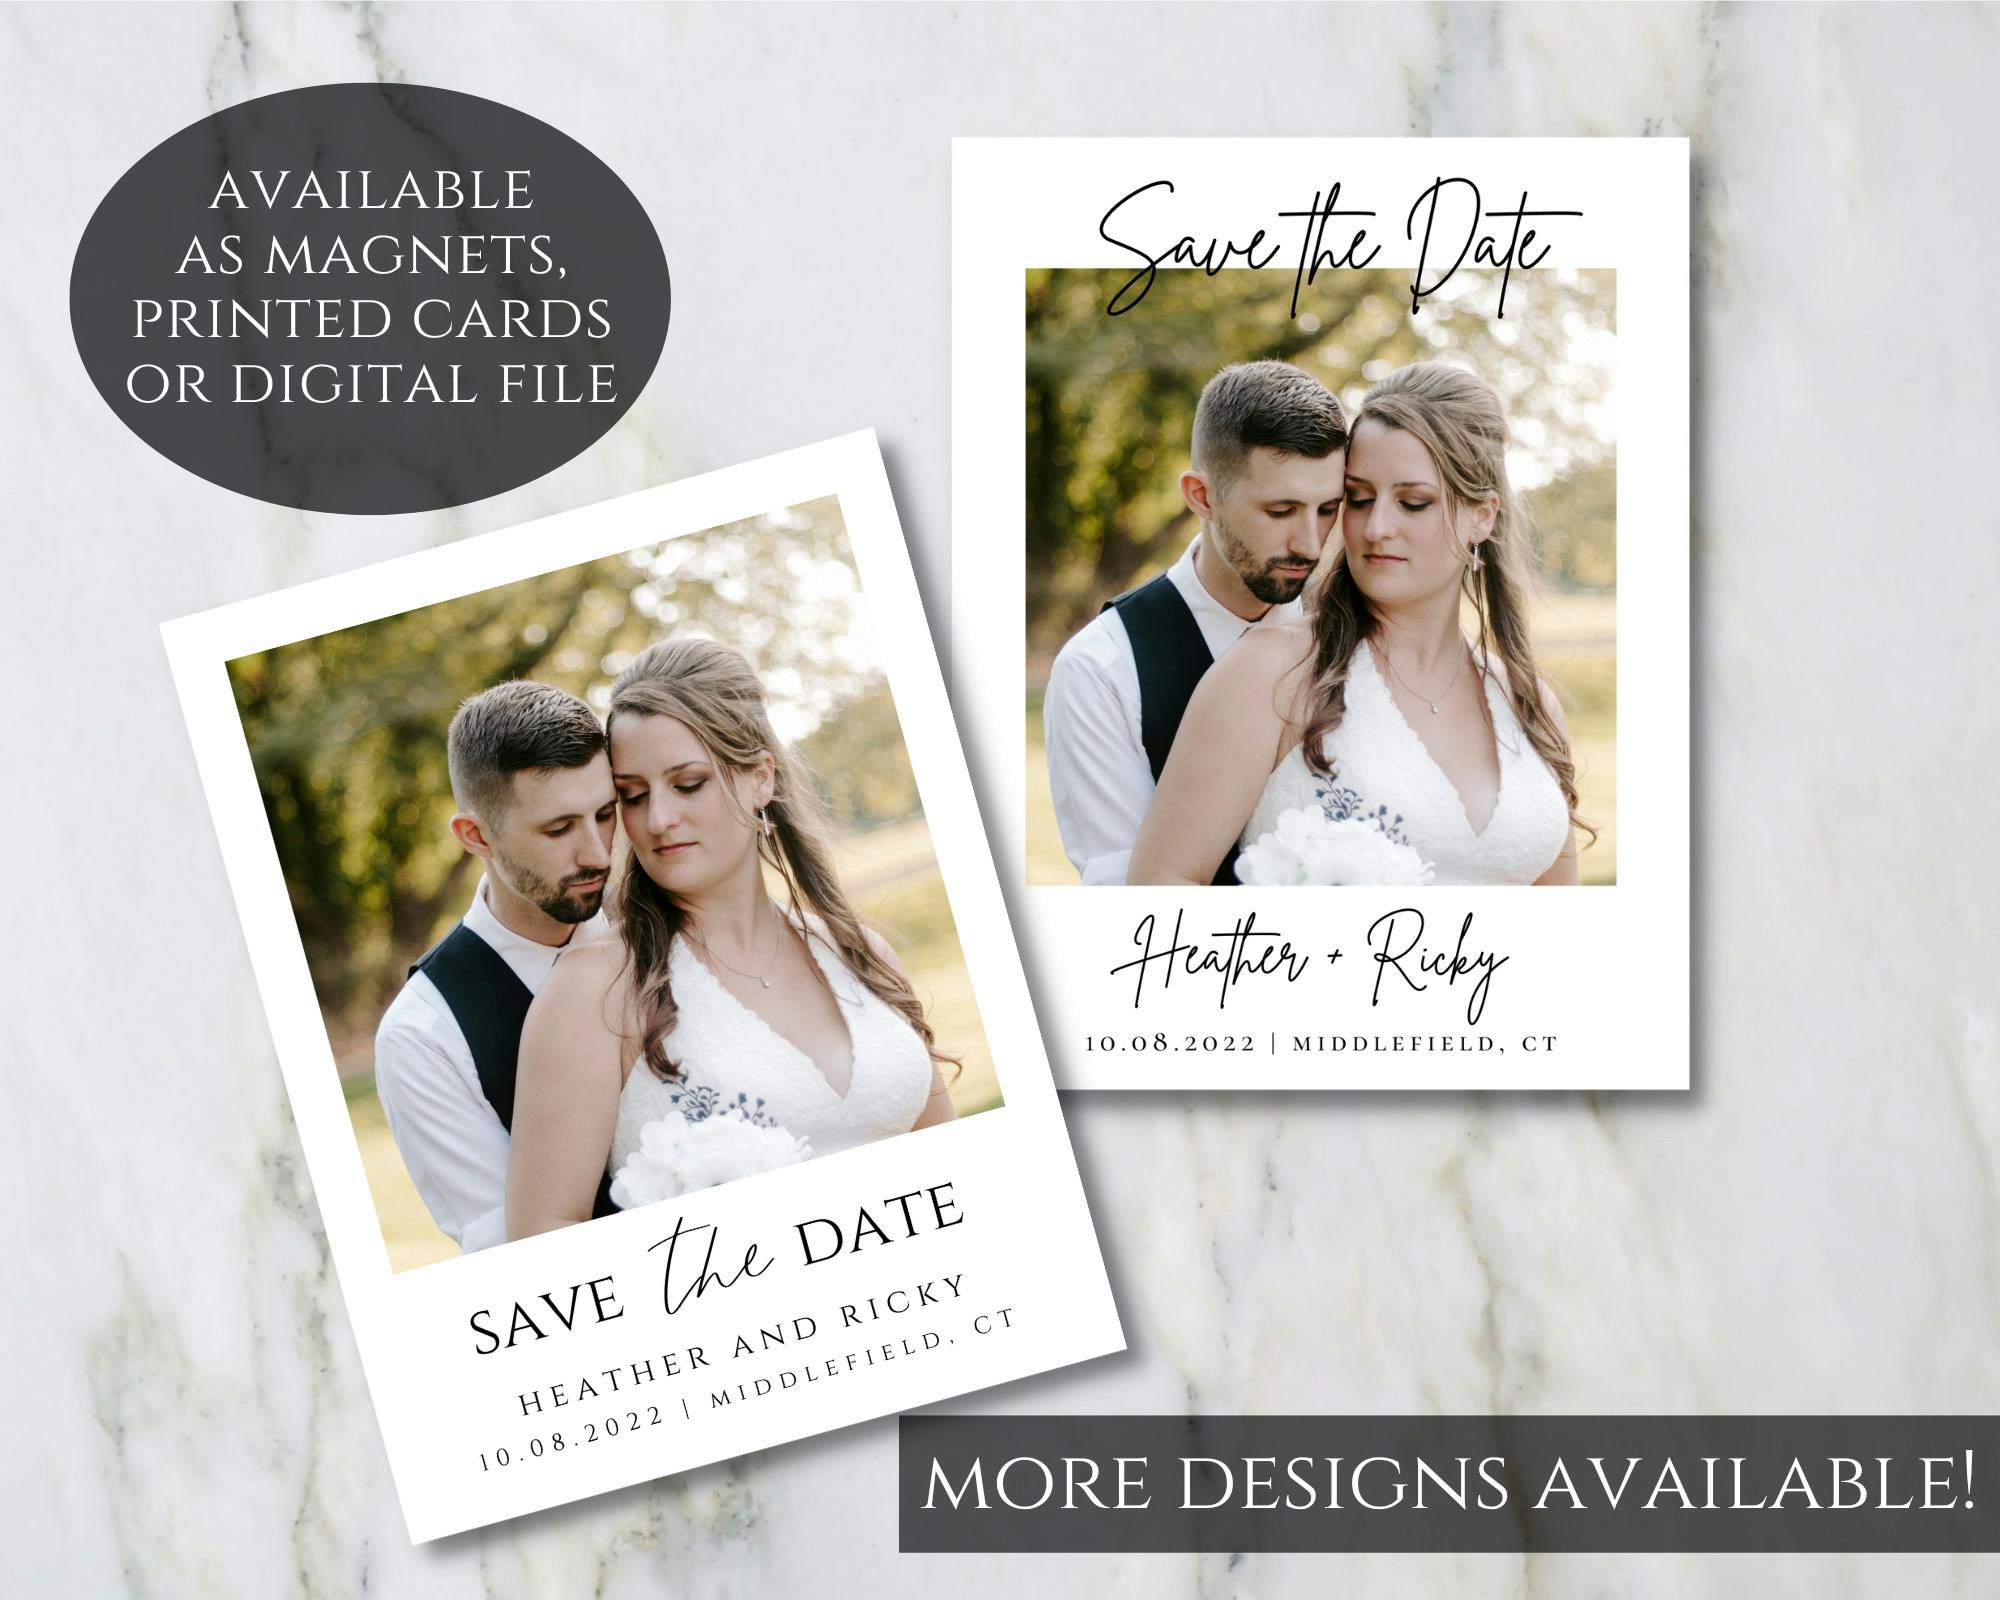 Save the Date Photograph Magnets or Printed Cards